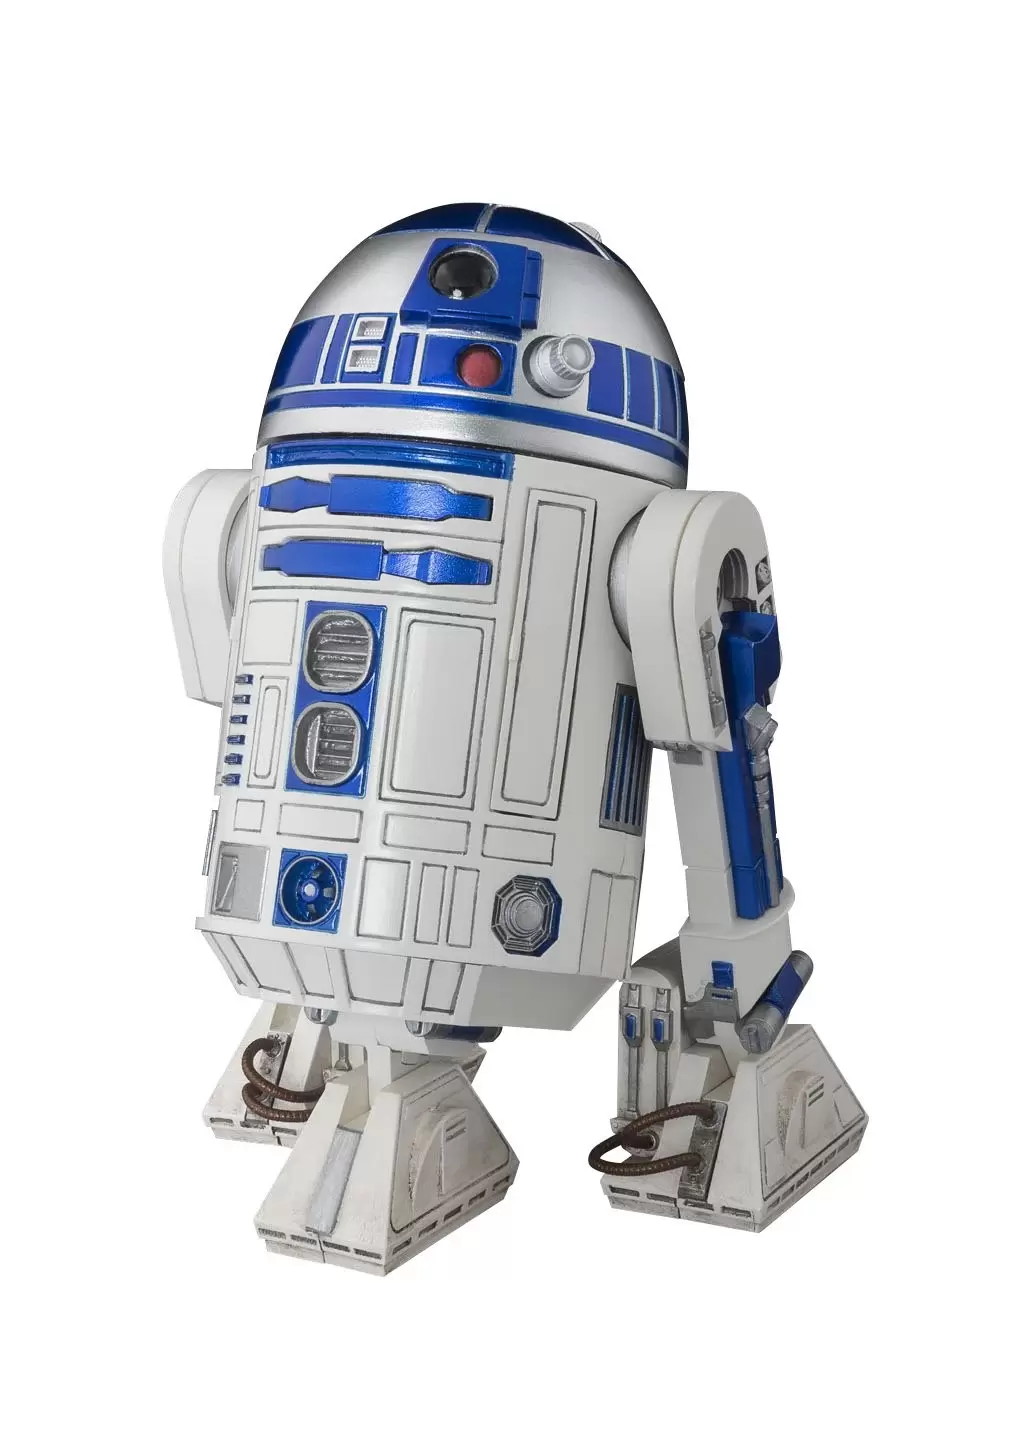 S.H. Figuarts Star Wars - A New Hope - R2-D2